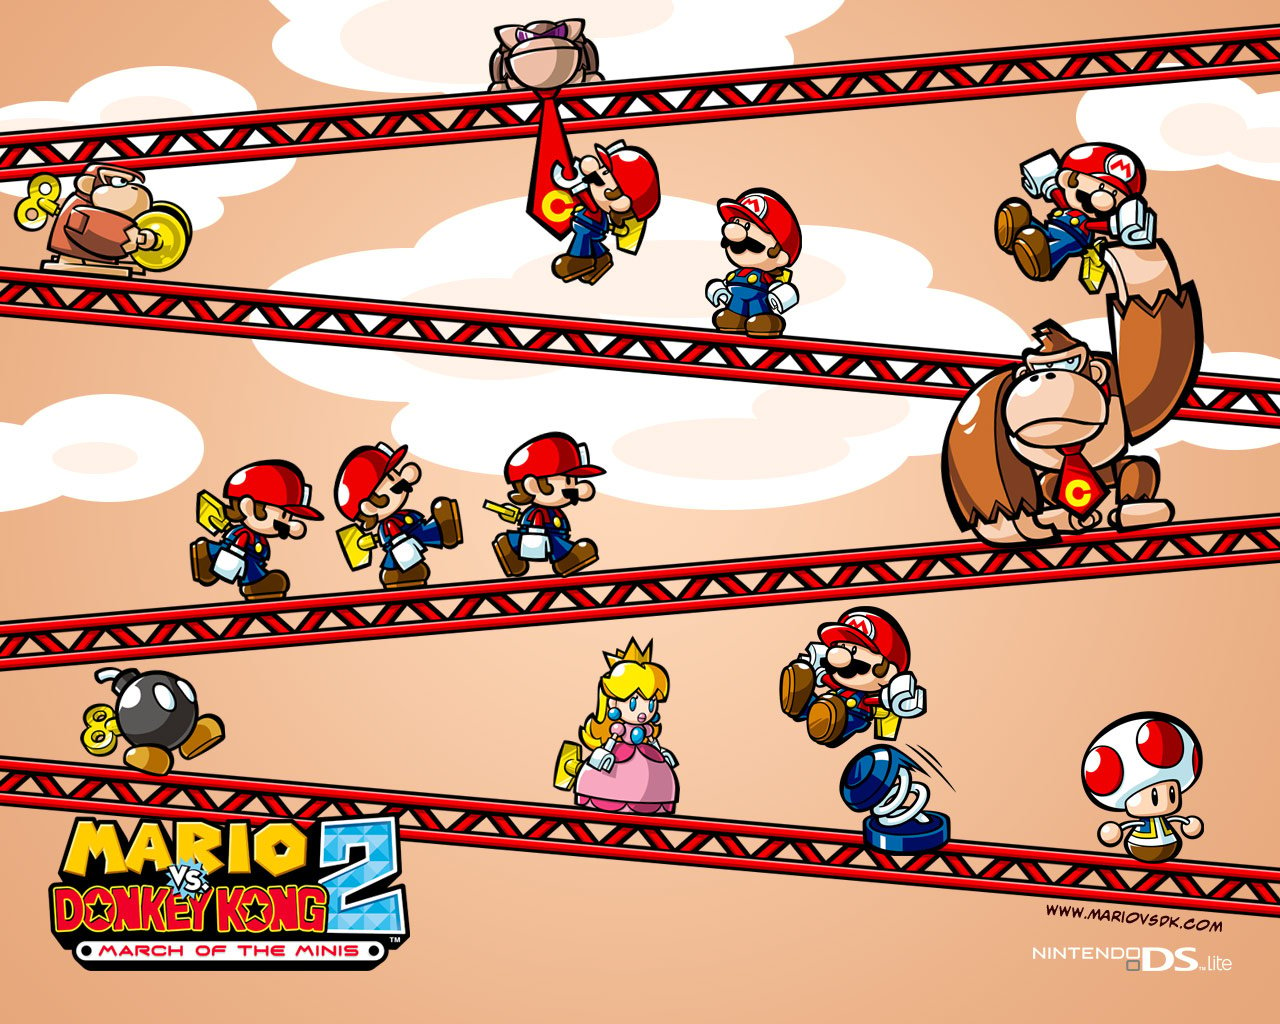 mario-vs-donkey-kong-2-march-of-the-minis-arrives-on-the-wii-u-eshop-this-week-nintendo-life